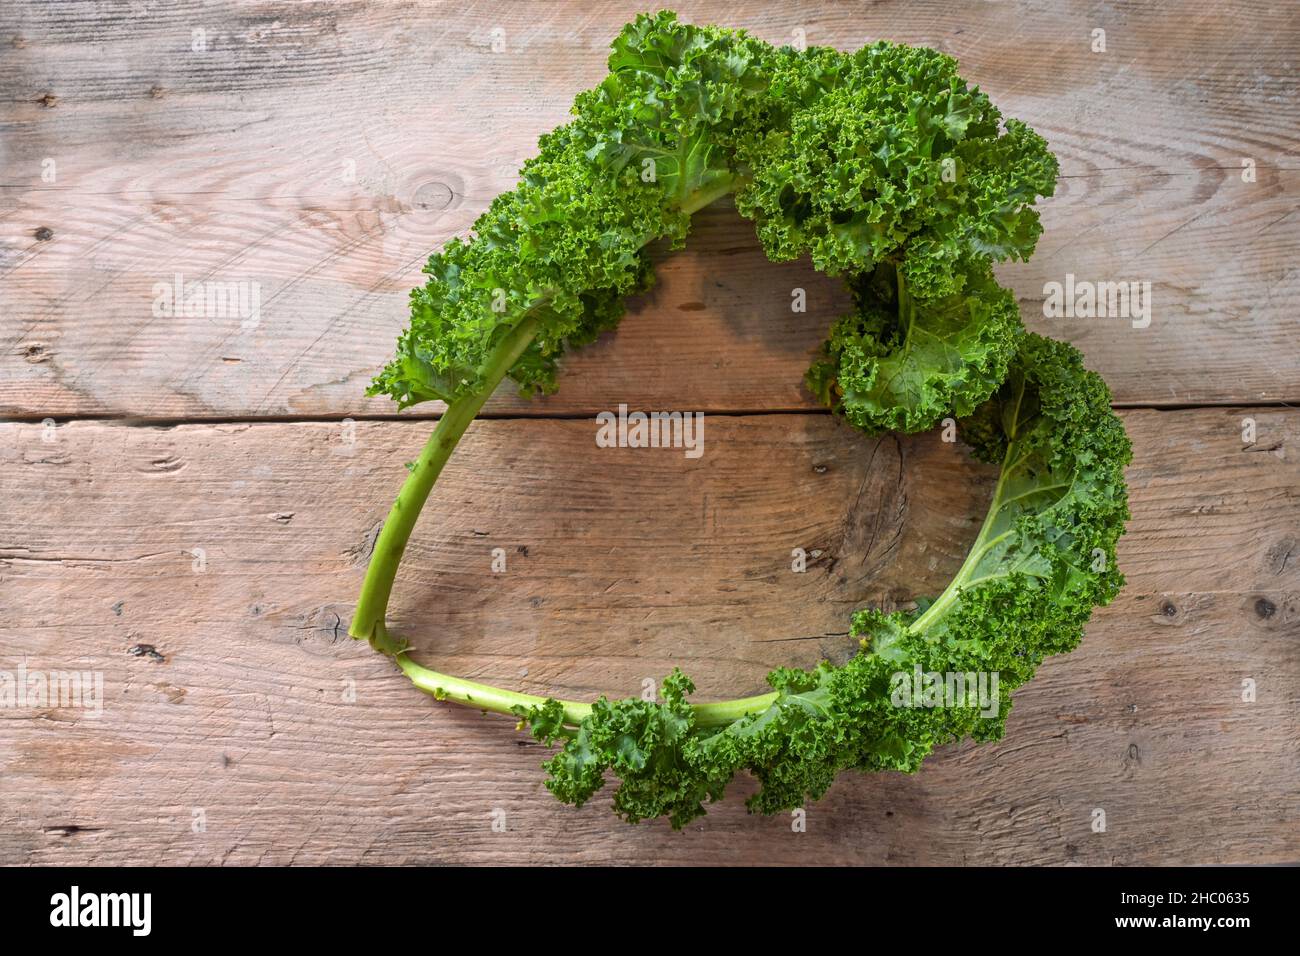 Curly leaves of kale or green leaf cabbage in the shape of a heart on a rustic wooden table, healthy winter vegetable with vitamins, fiber and mineral Stock Photo